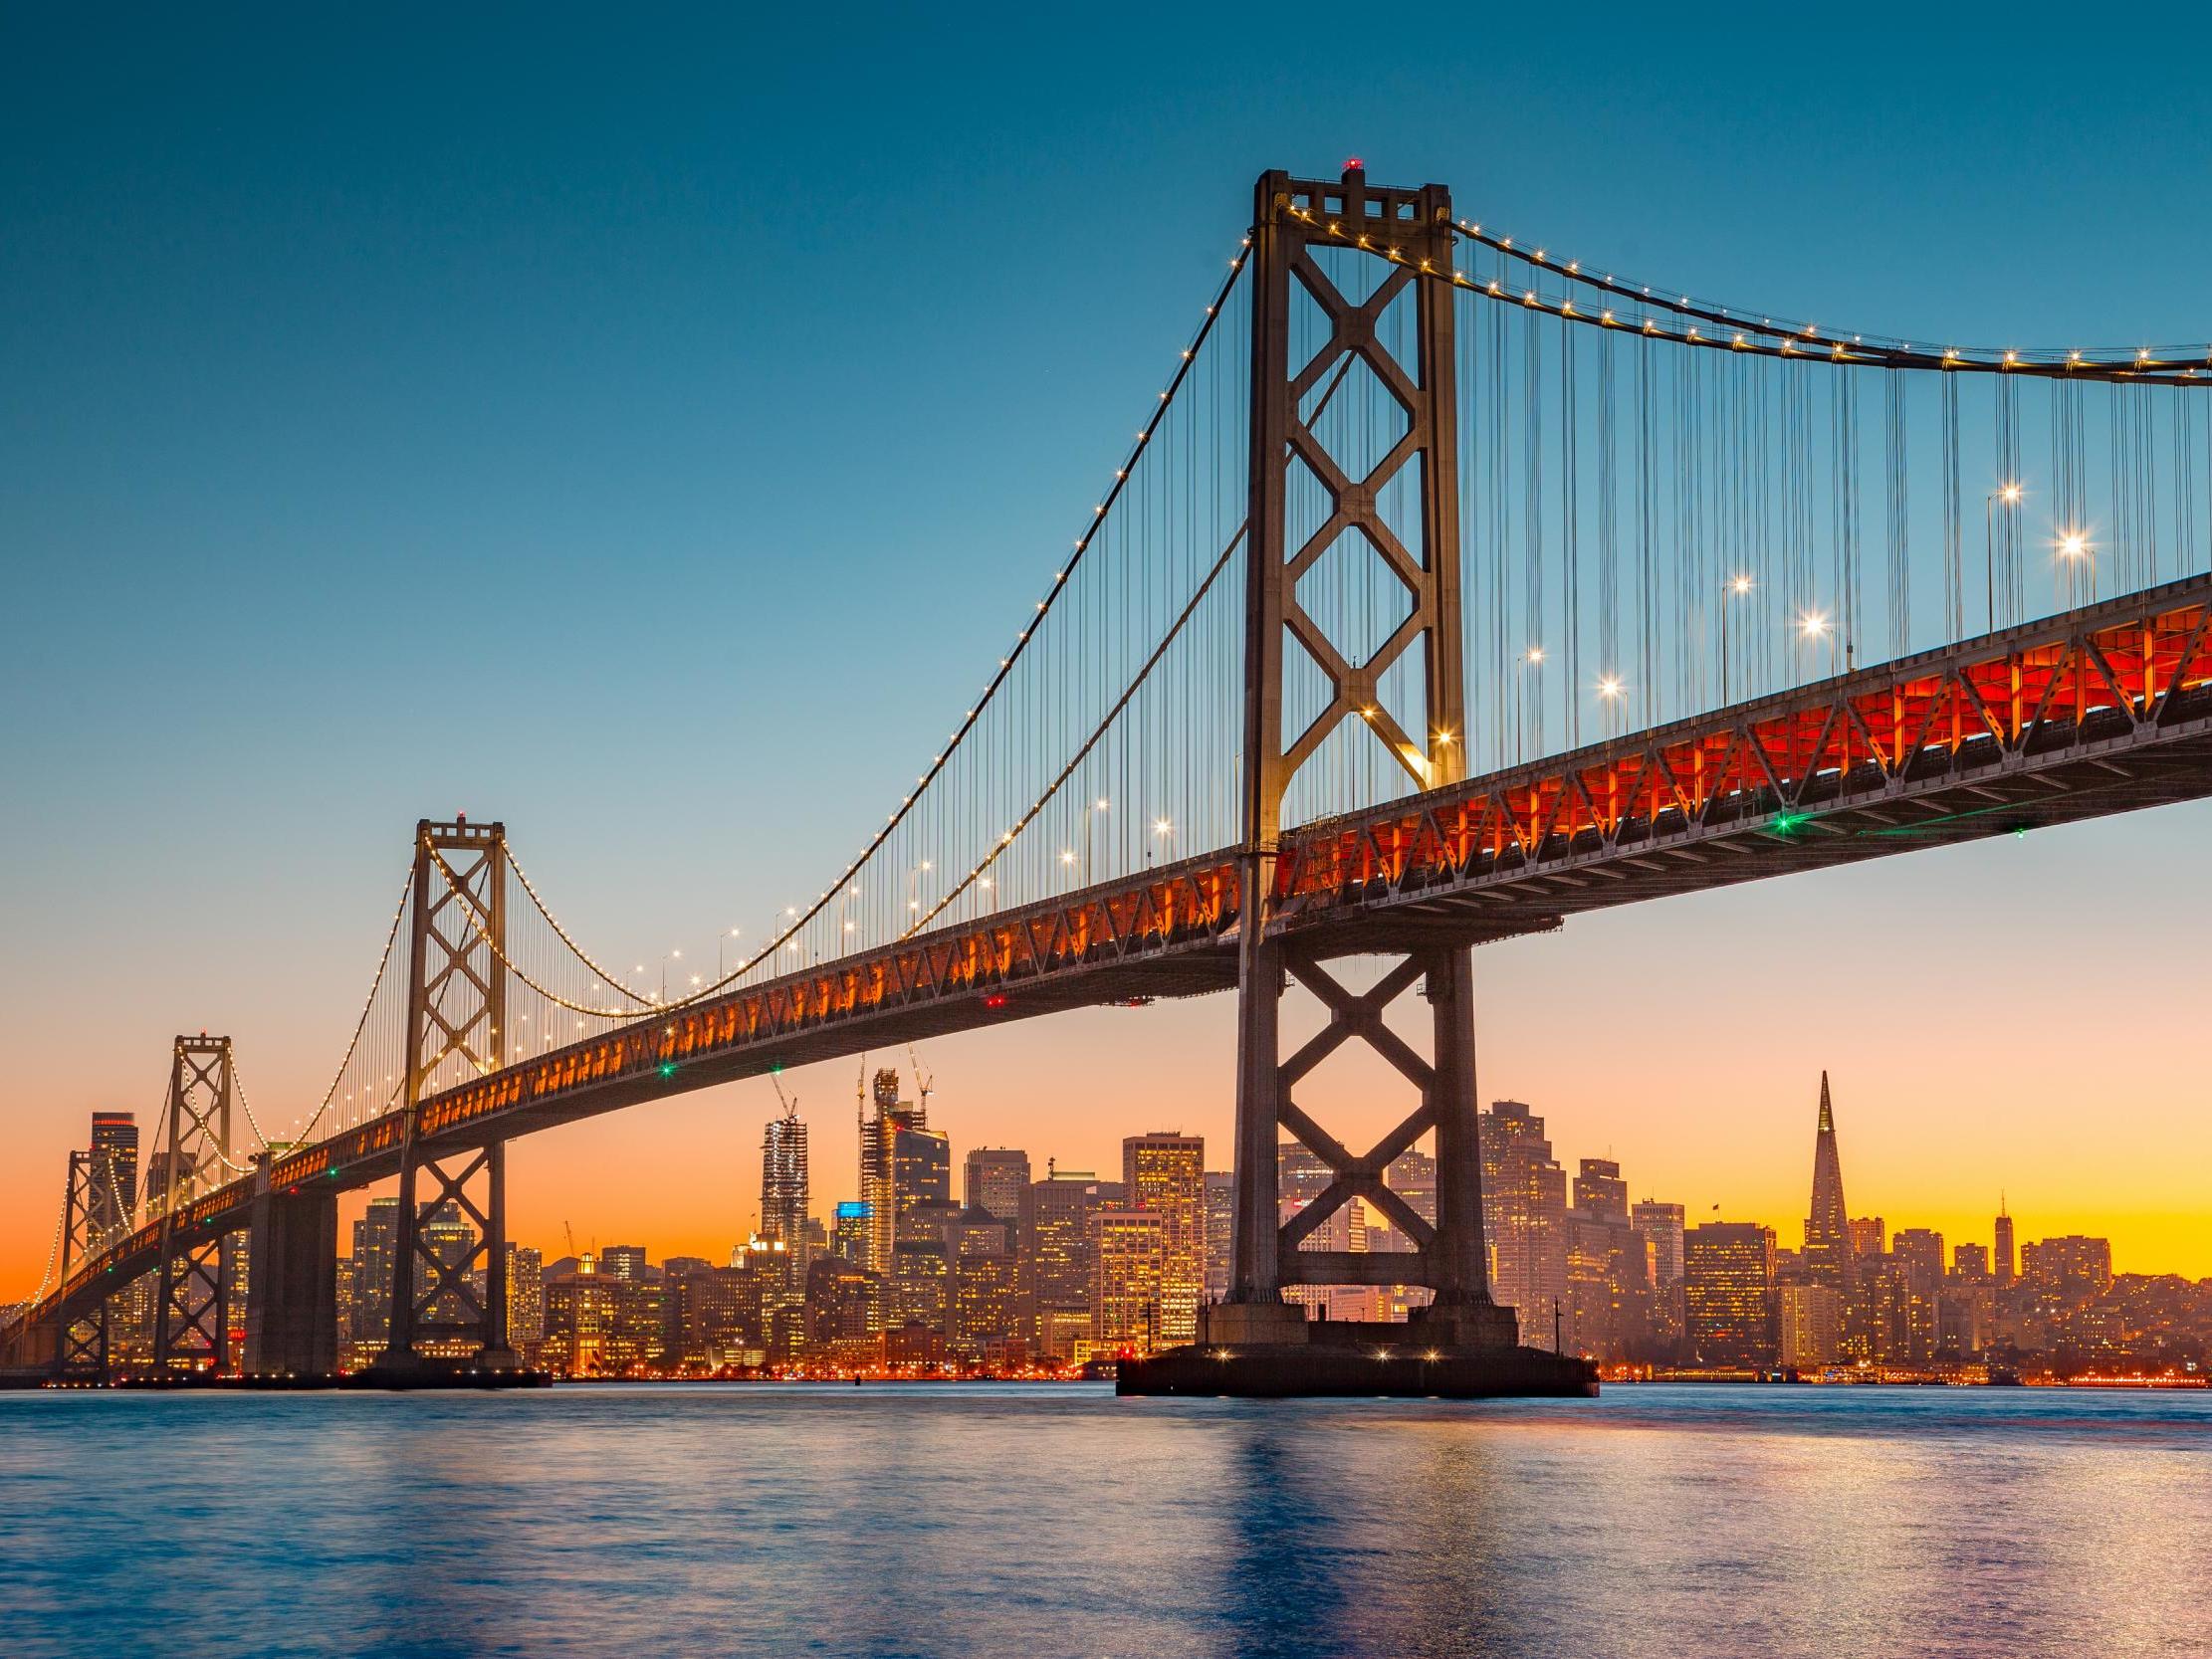 Forget the Golden Gate, where are you going to stay? 